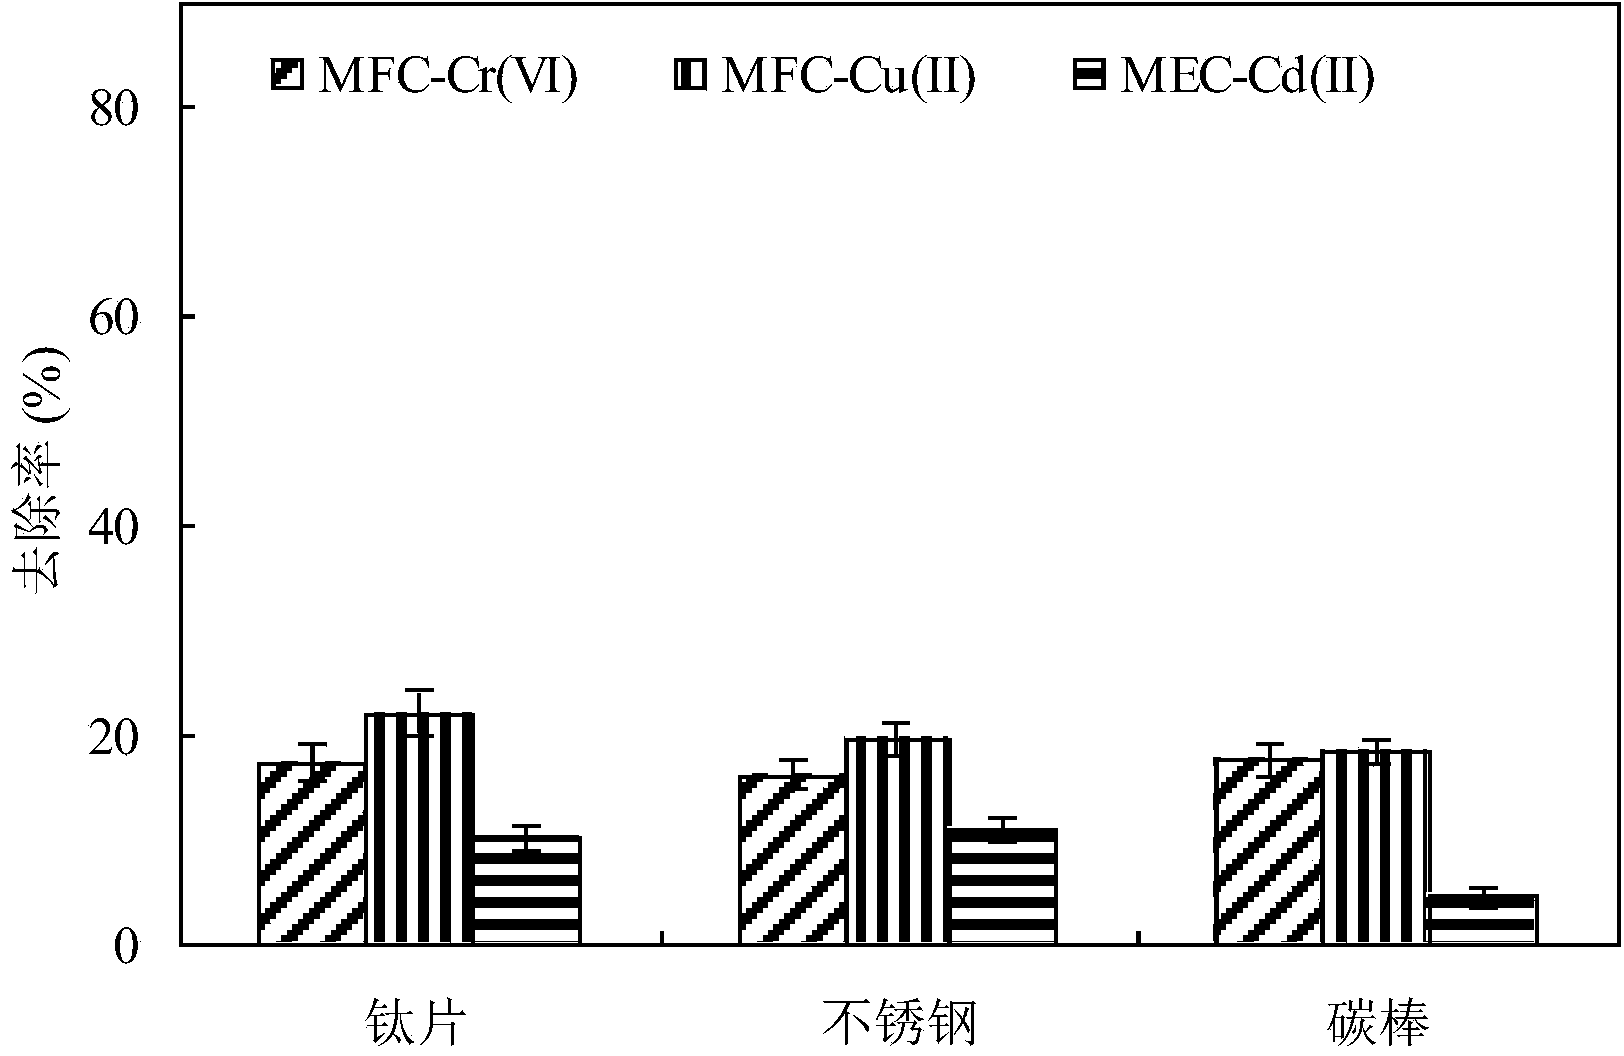 Method for recovering multiple metals through driving microbial electrolysis cells by microbial fuel cells